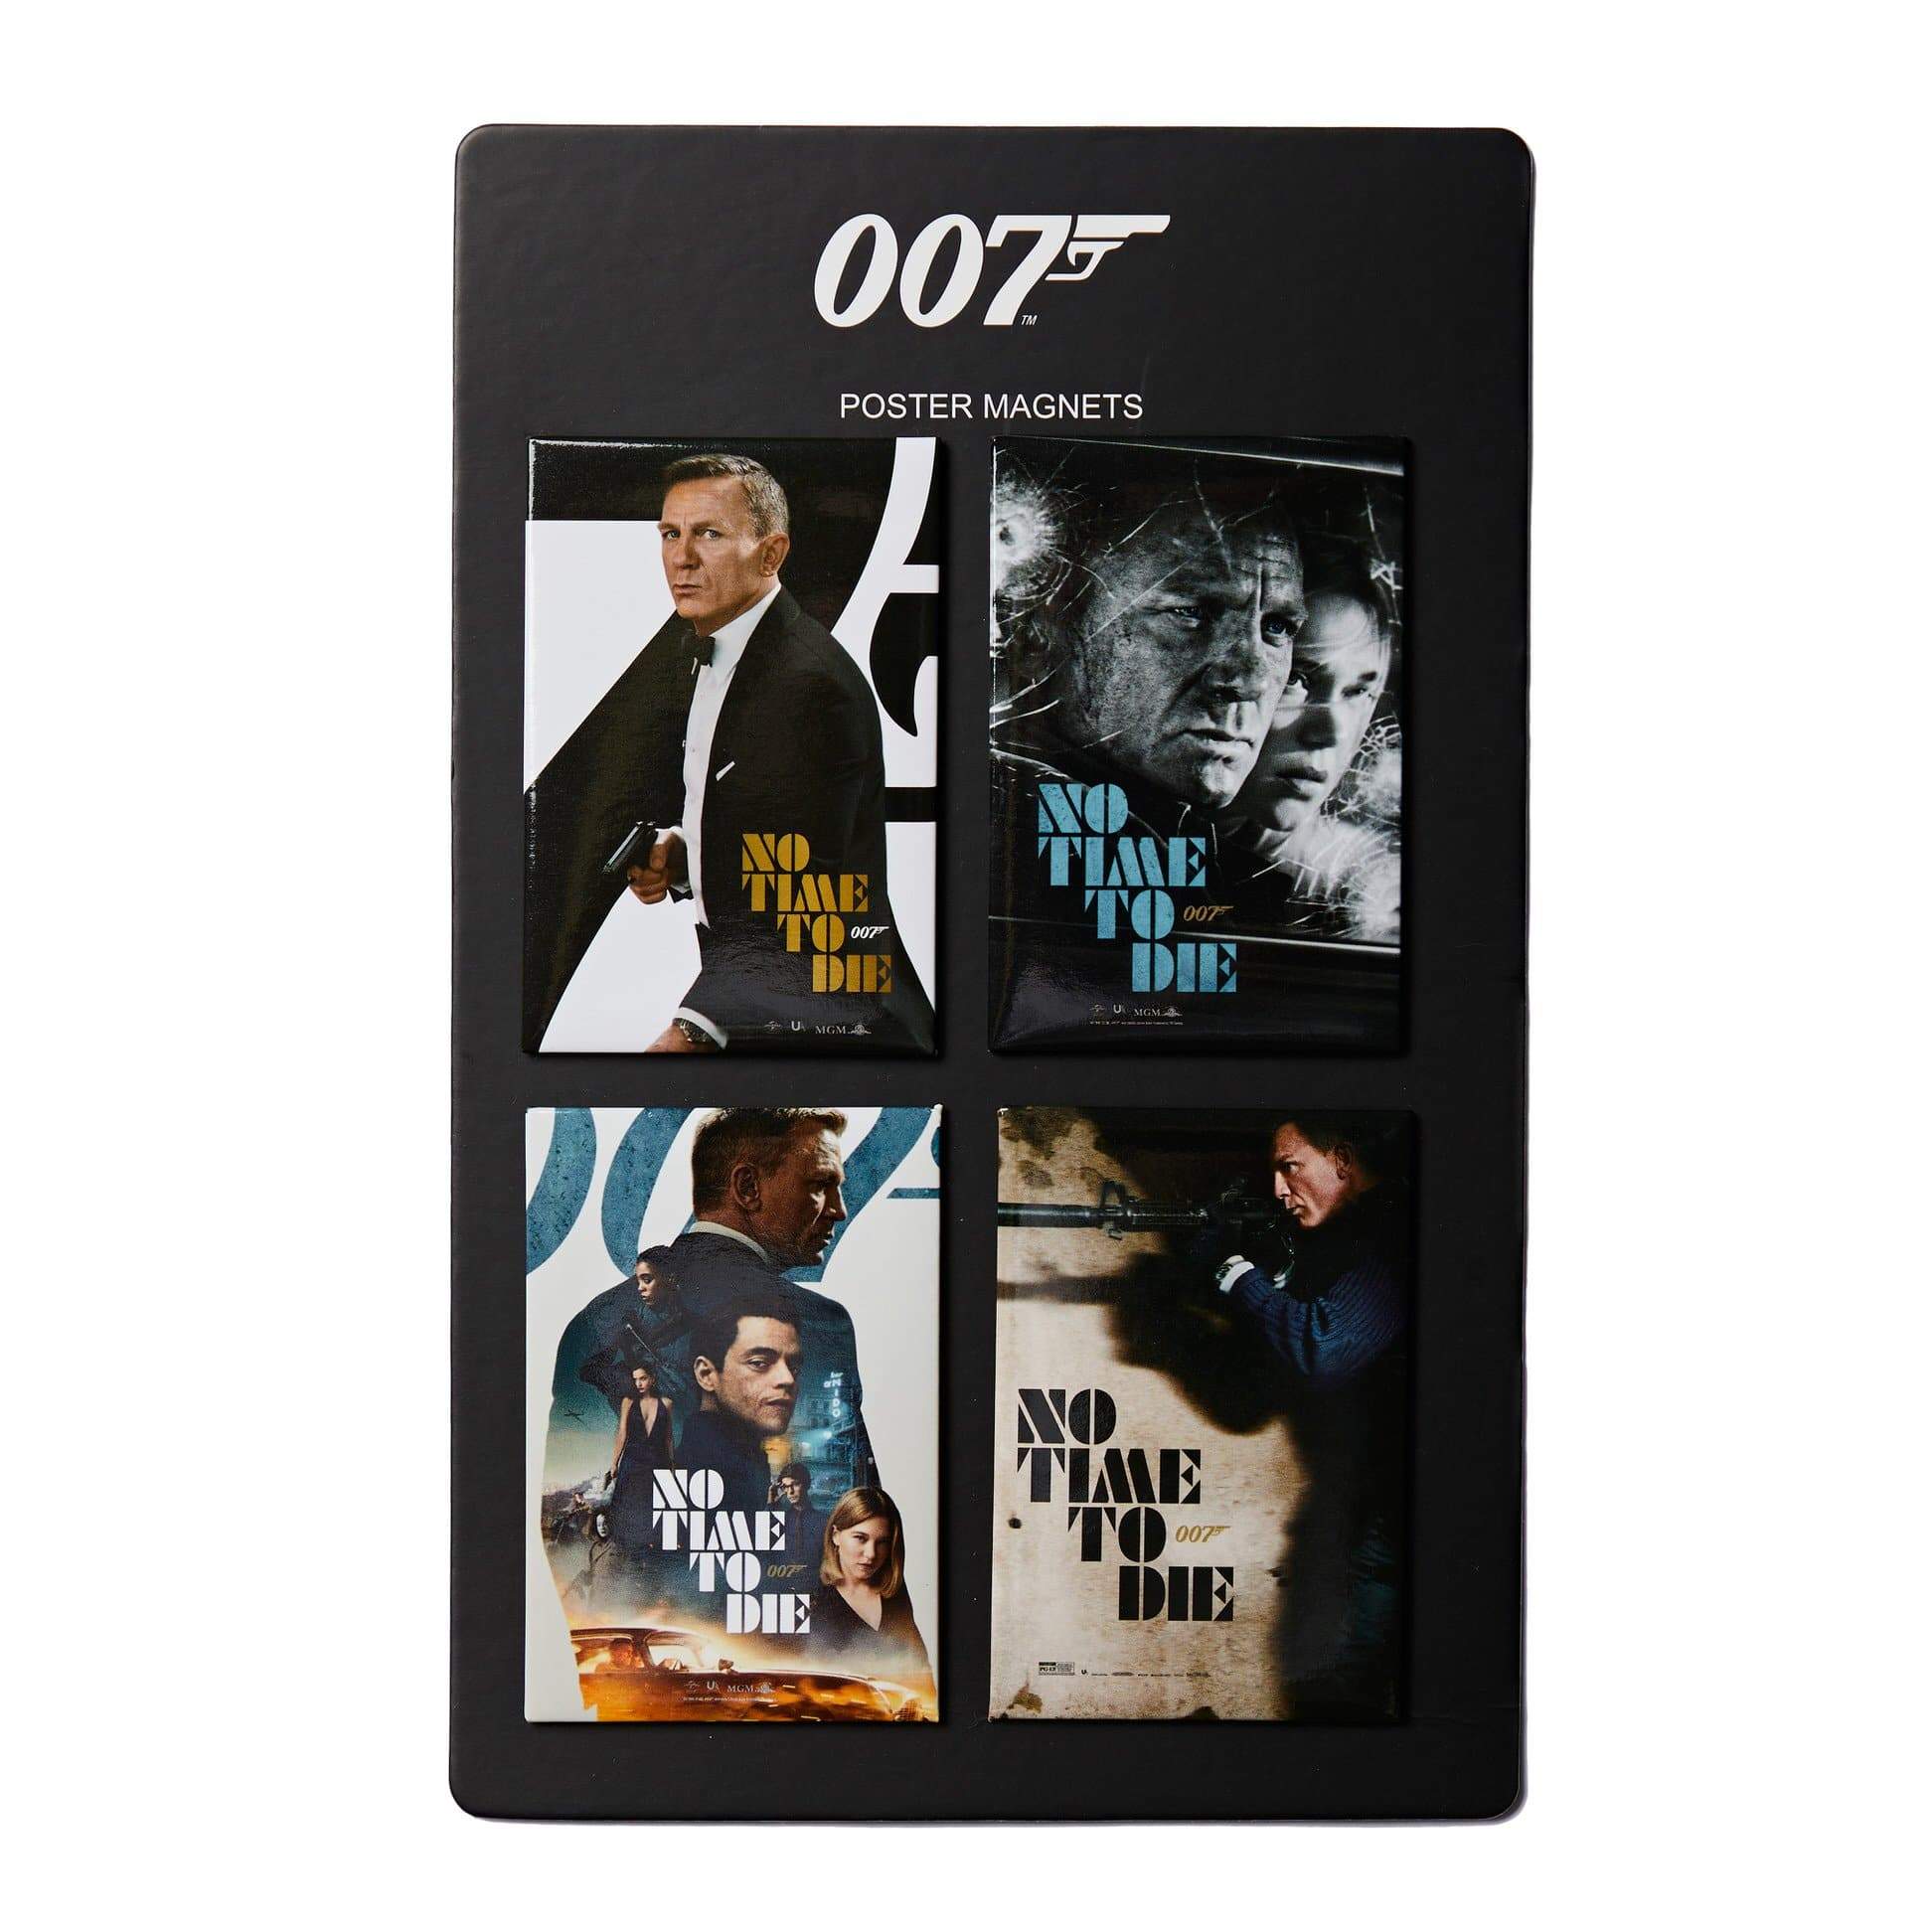 James Bond No Time To Die Poster Magnet Set | 007 Store - 007Store